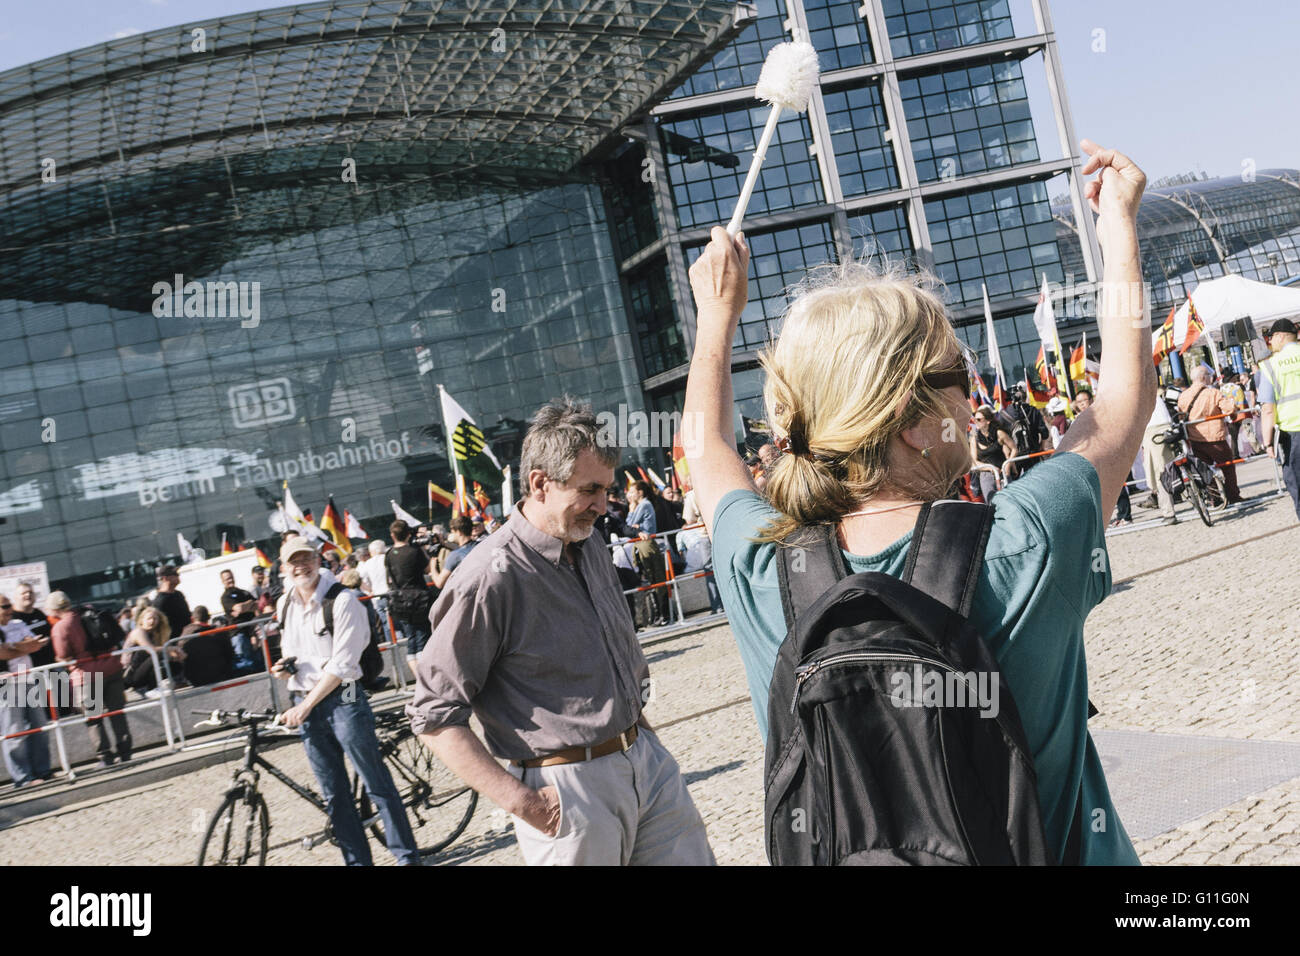 Berlin, Berlin, Germany. 7th May, 2016. An activist holds a toilet brush in front of the rally held under the motto 'Merkel muss weg![Merkel must go]' organised by far-right group 'We for Berlin & We for Germany' Credit:  Jan Scheunert/ZUMA Wire/Alamy Live News Stock Photo